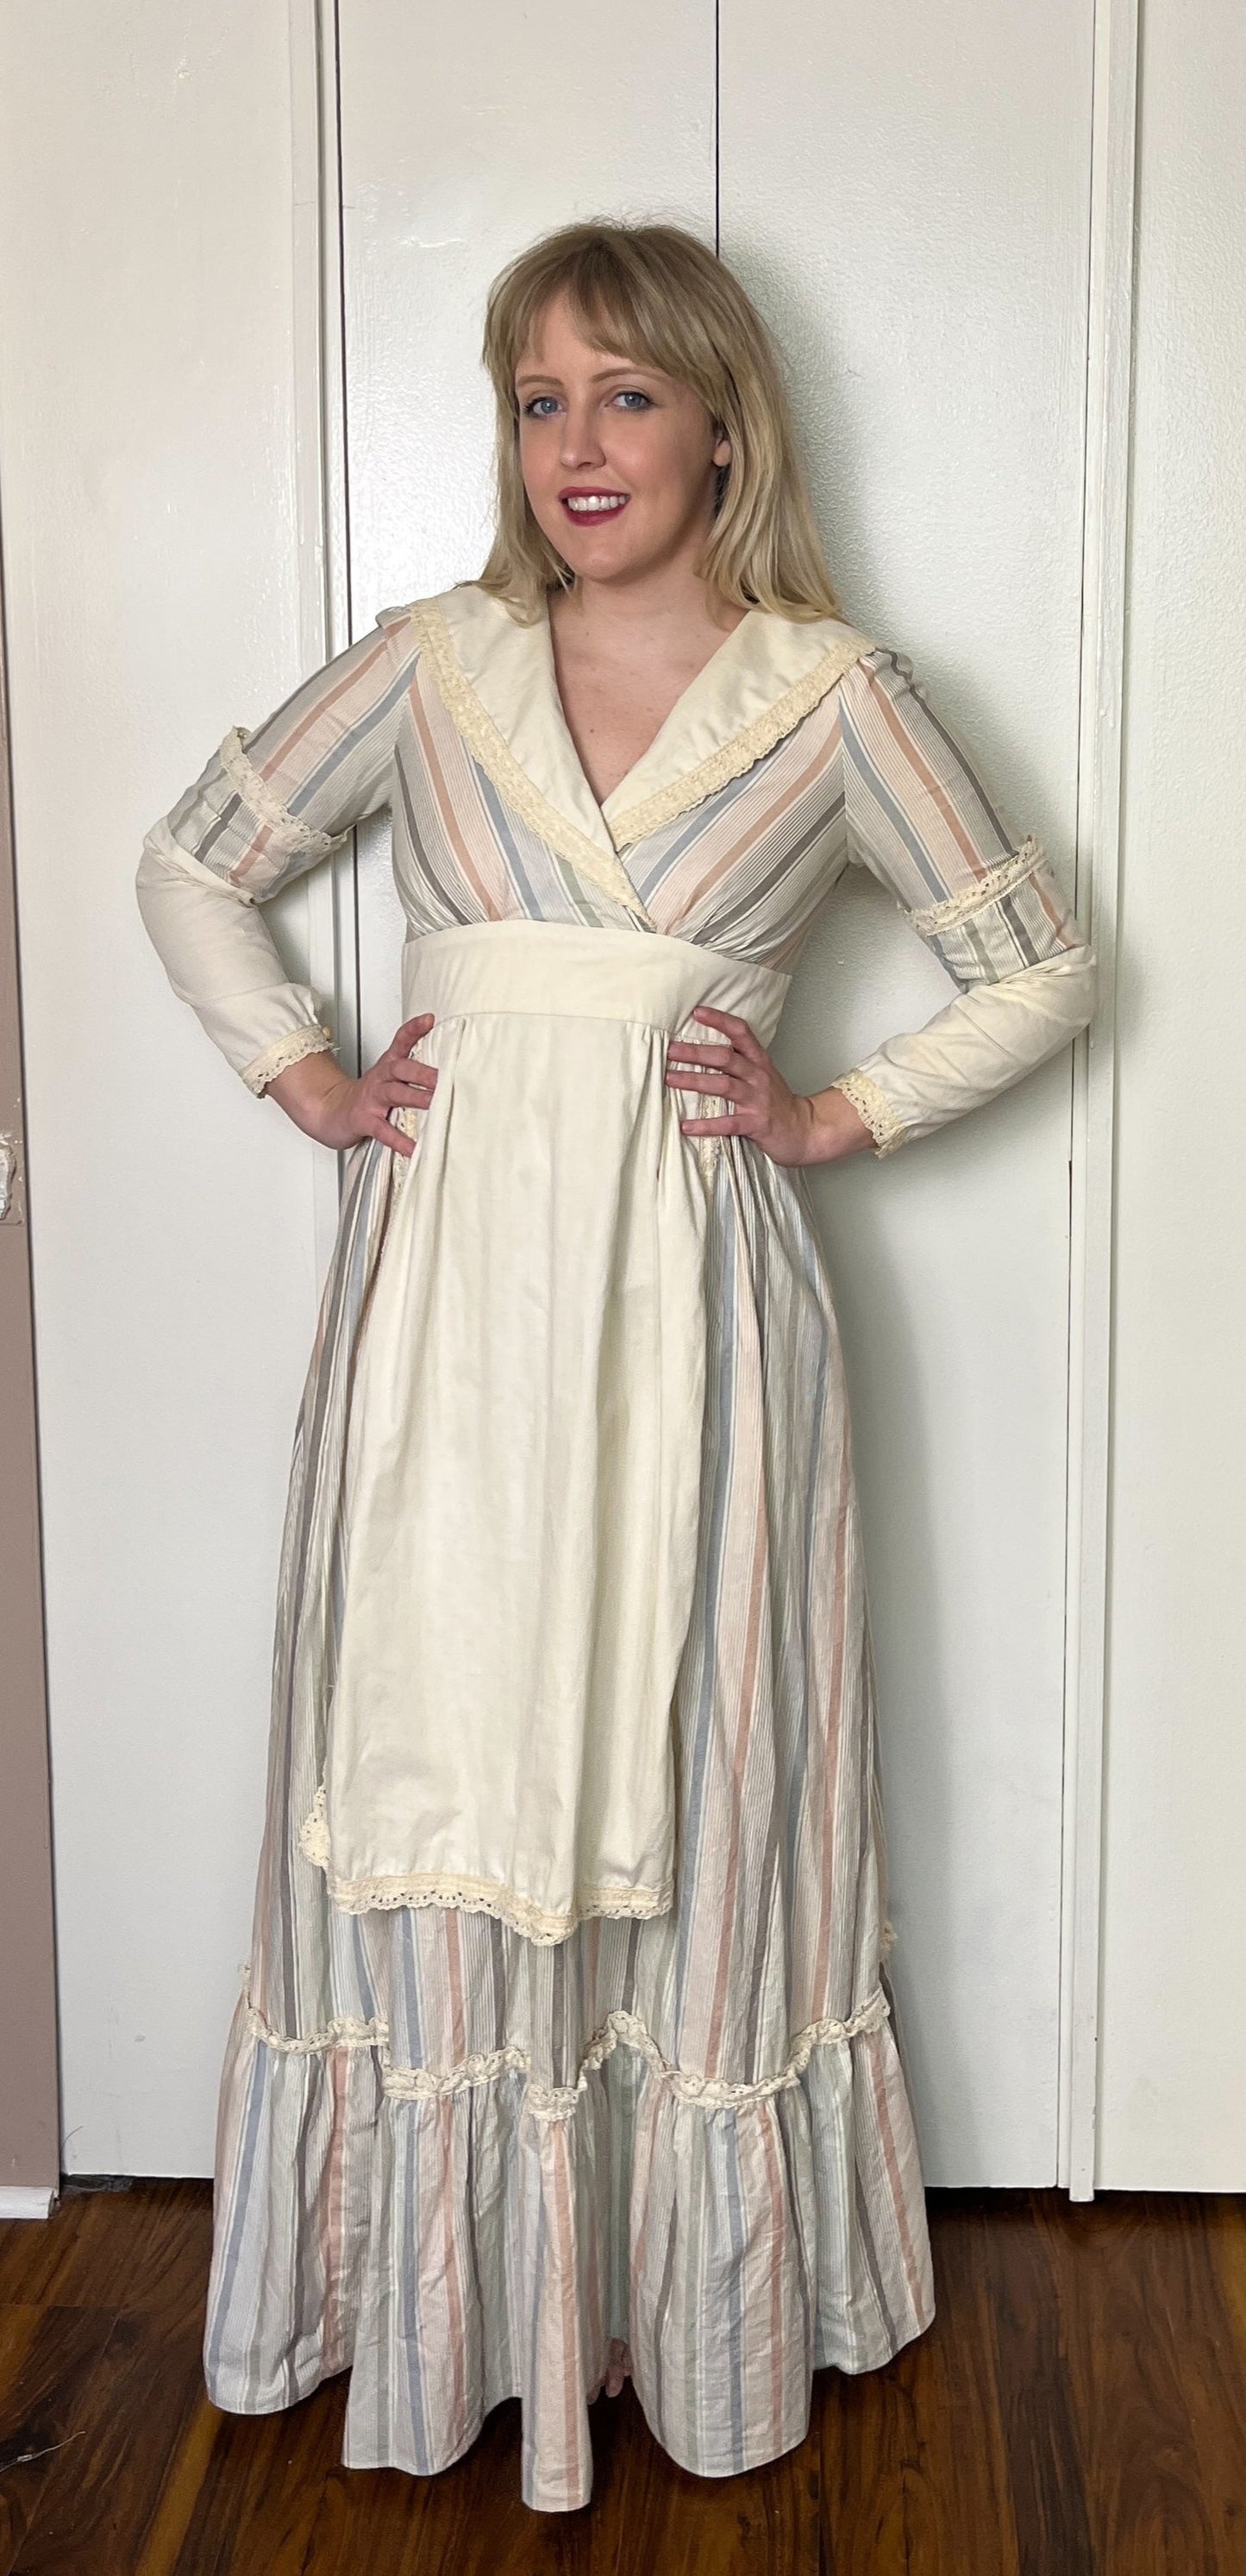 Vintage 1970's "Gunne Sax by Jessica McClintock" (Bicentennial Collection) Apron-Front Long Sleeve Maxi Dress